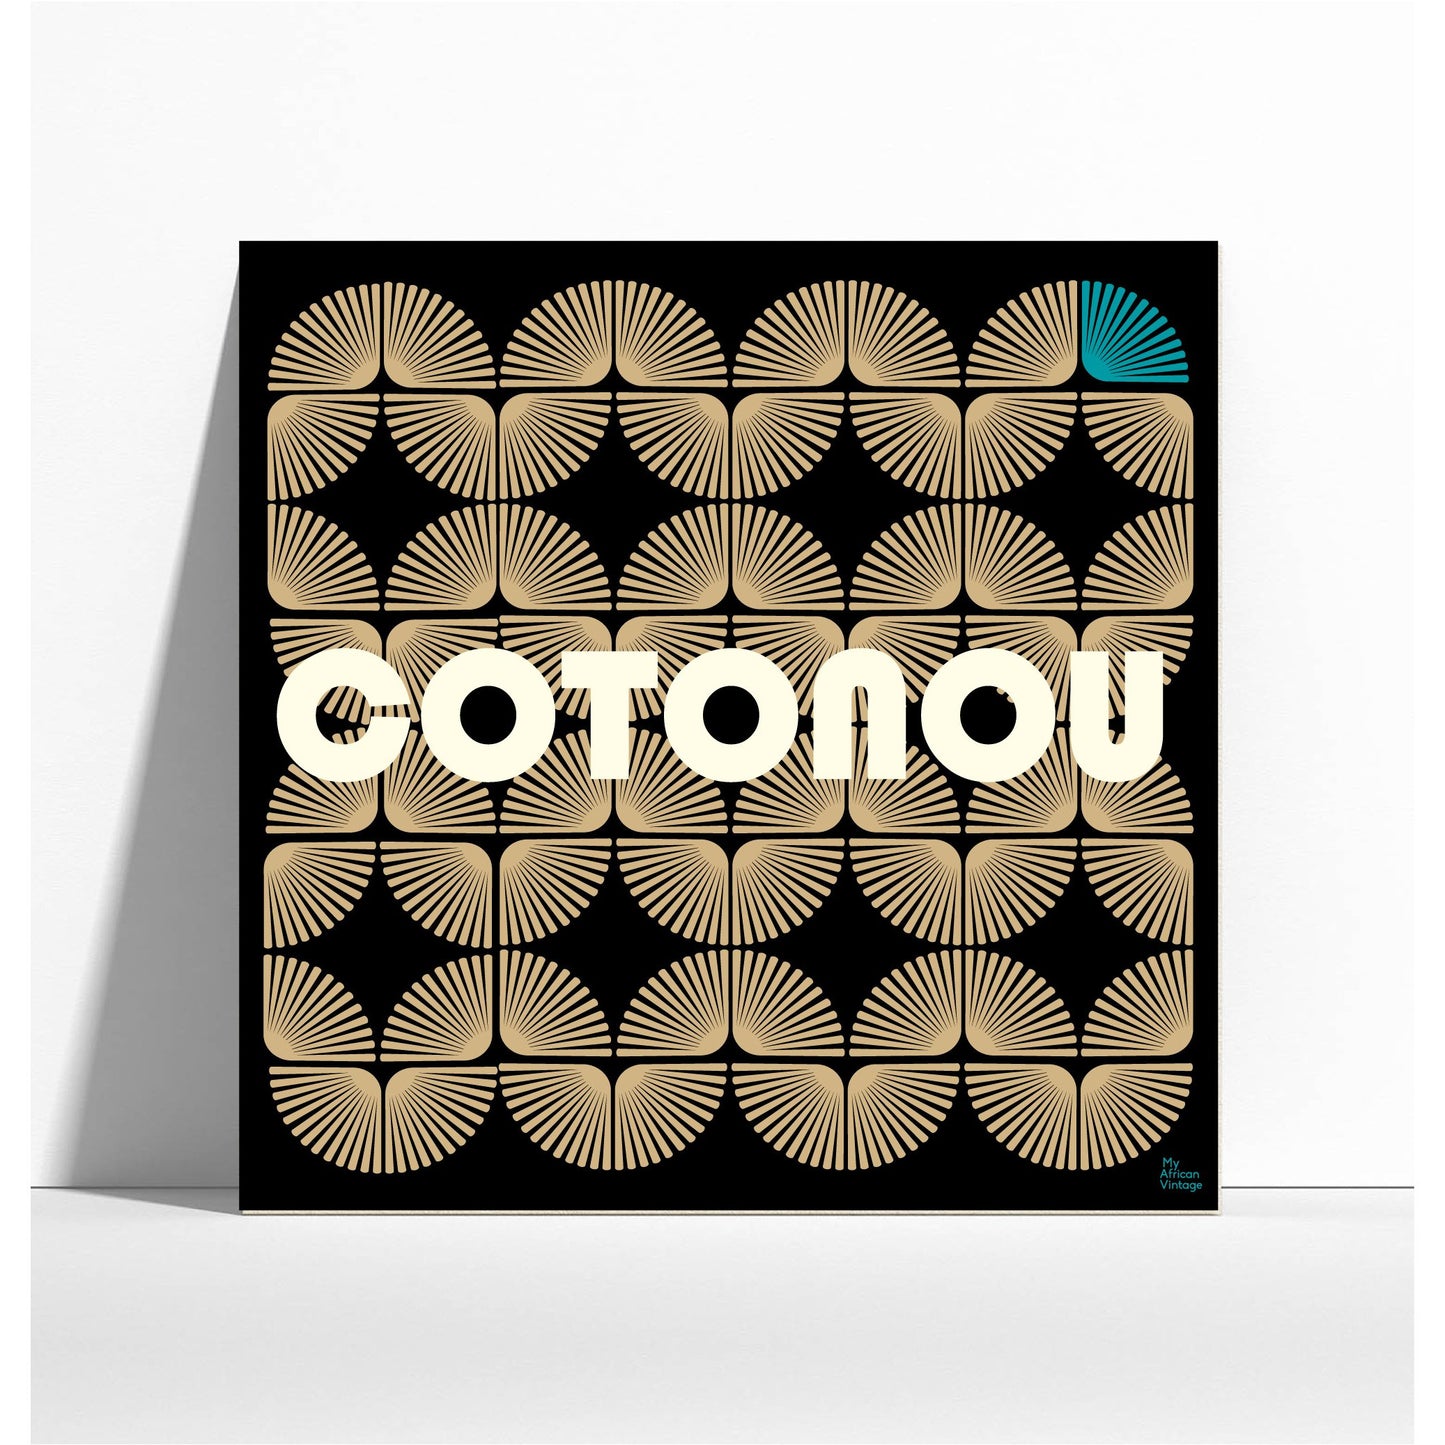 "Cotonou" retro style poster - "My African Vintage" collection